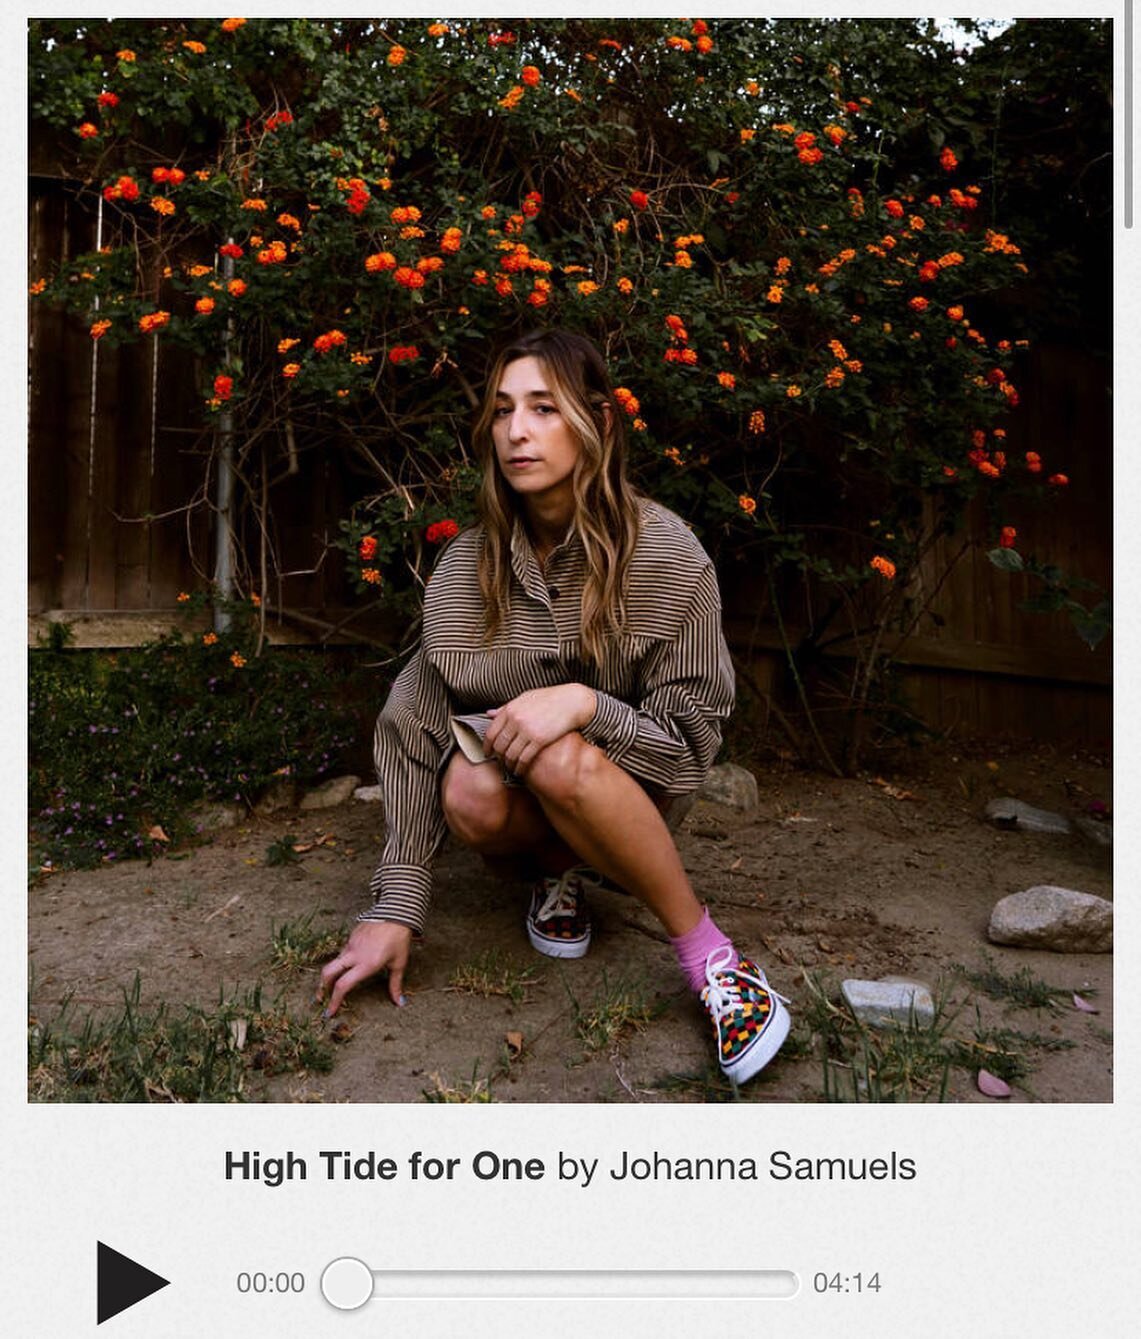 In honor of bandcamp Friday - here is some newly released music that I had the privilege of working on ! 

@johannasamuels - first single from new LP. This was the first flying cloud session ever 🐿

@widowspeaking&rsquo;s new LP &lsquo;plum&rsquo; ?